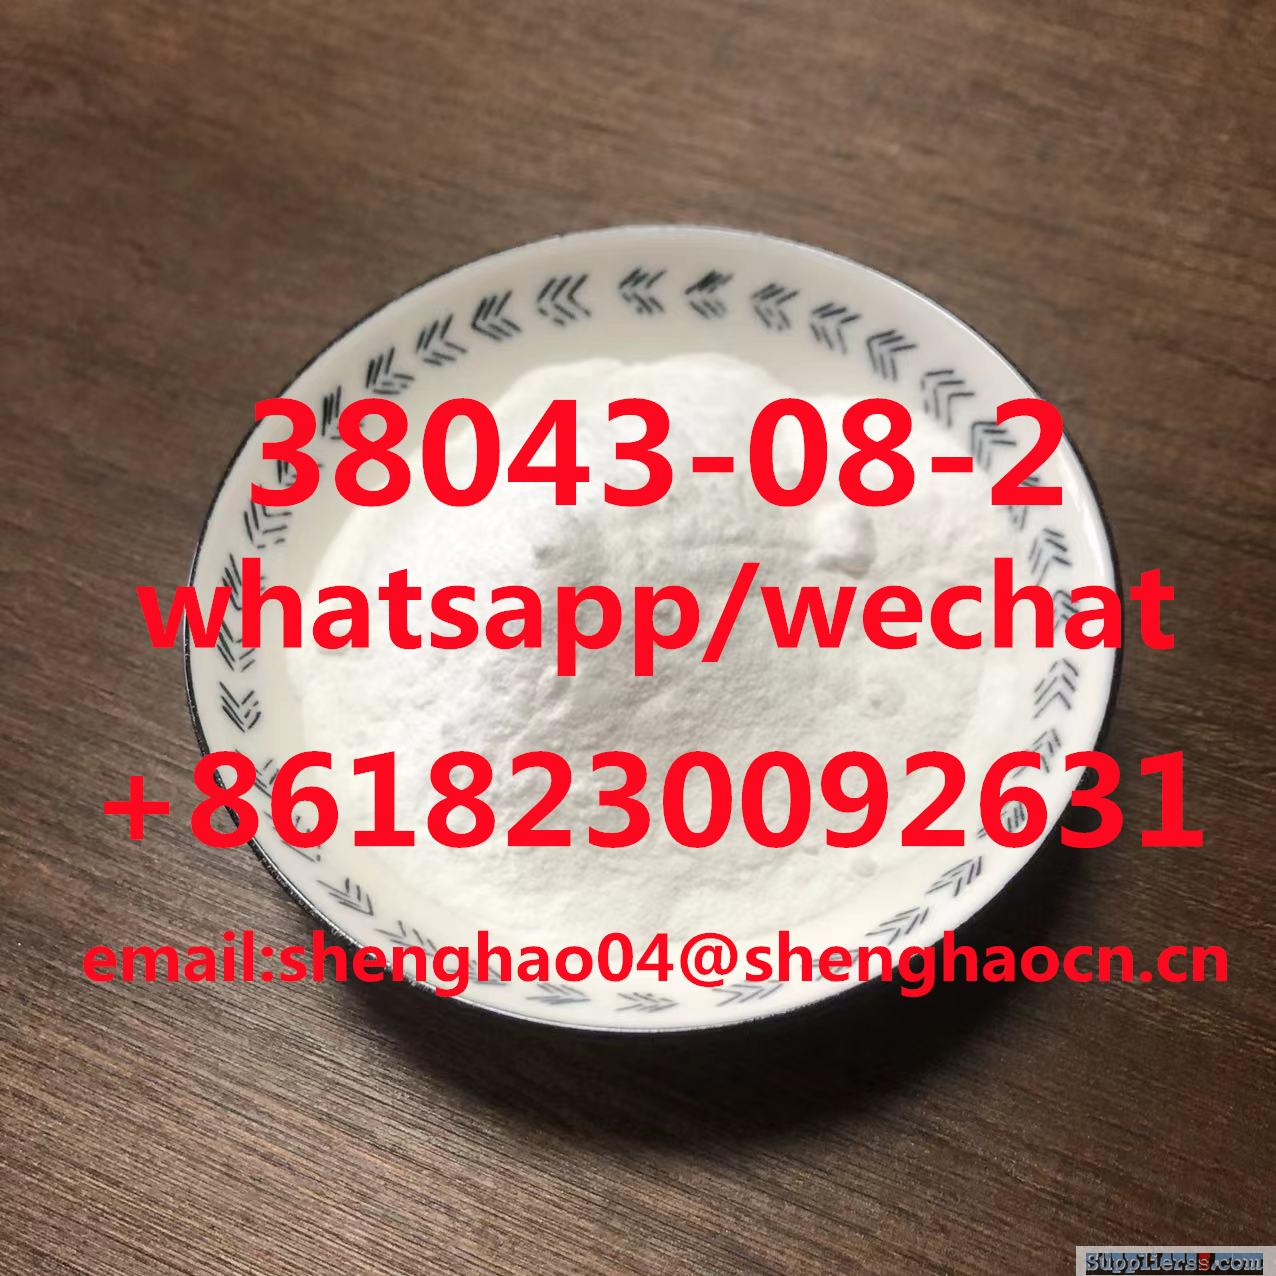 good quality 38043-08-2 fast delivery